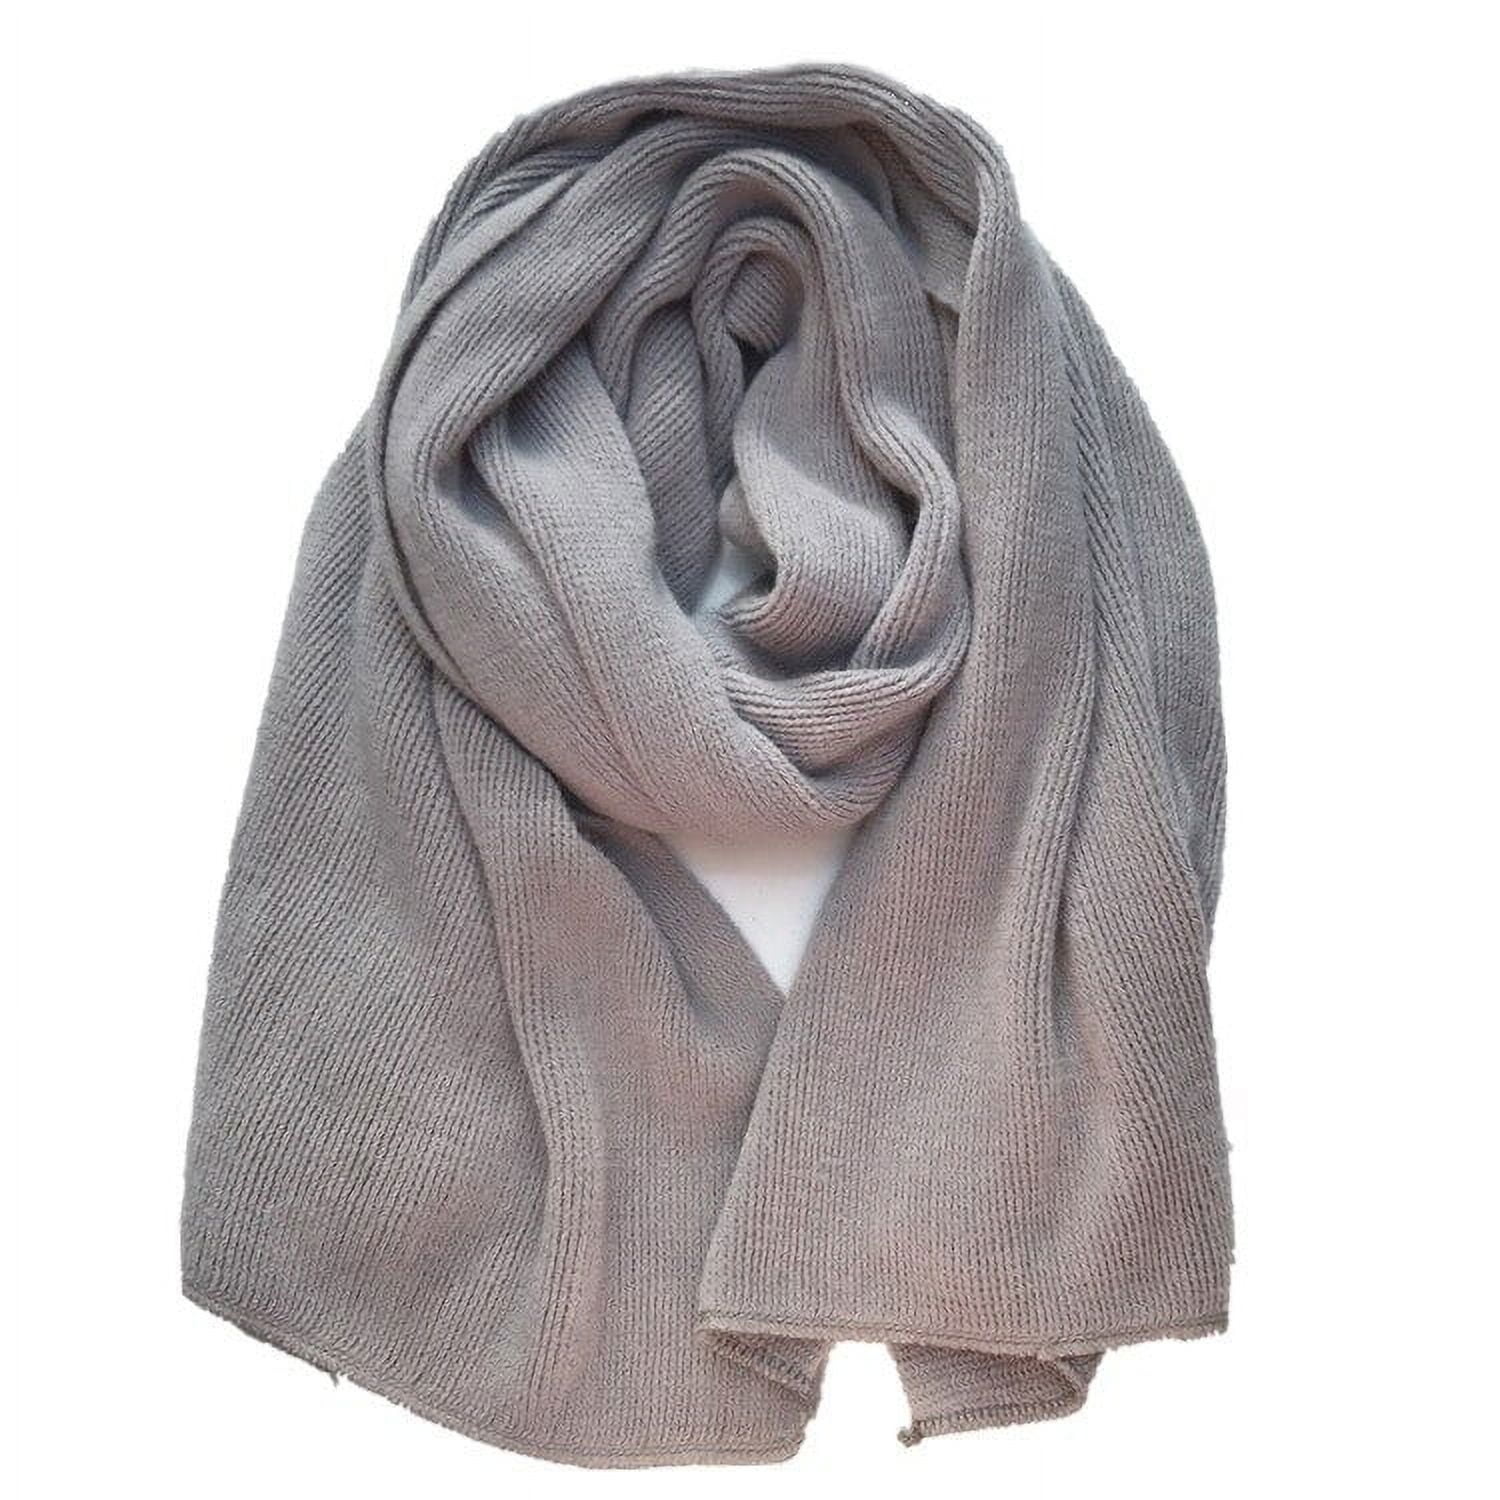 Sackcloth Patten Scarf for Sale by HypeEmporium